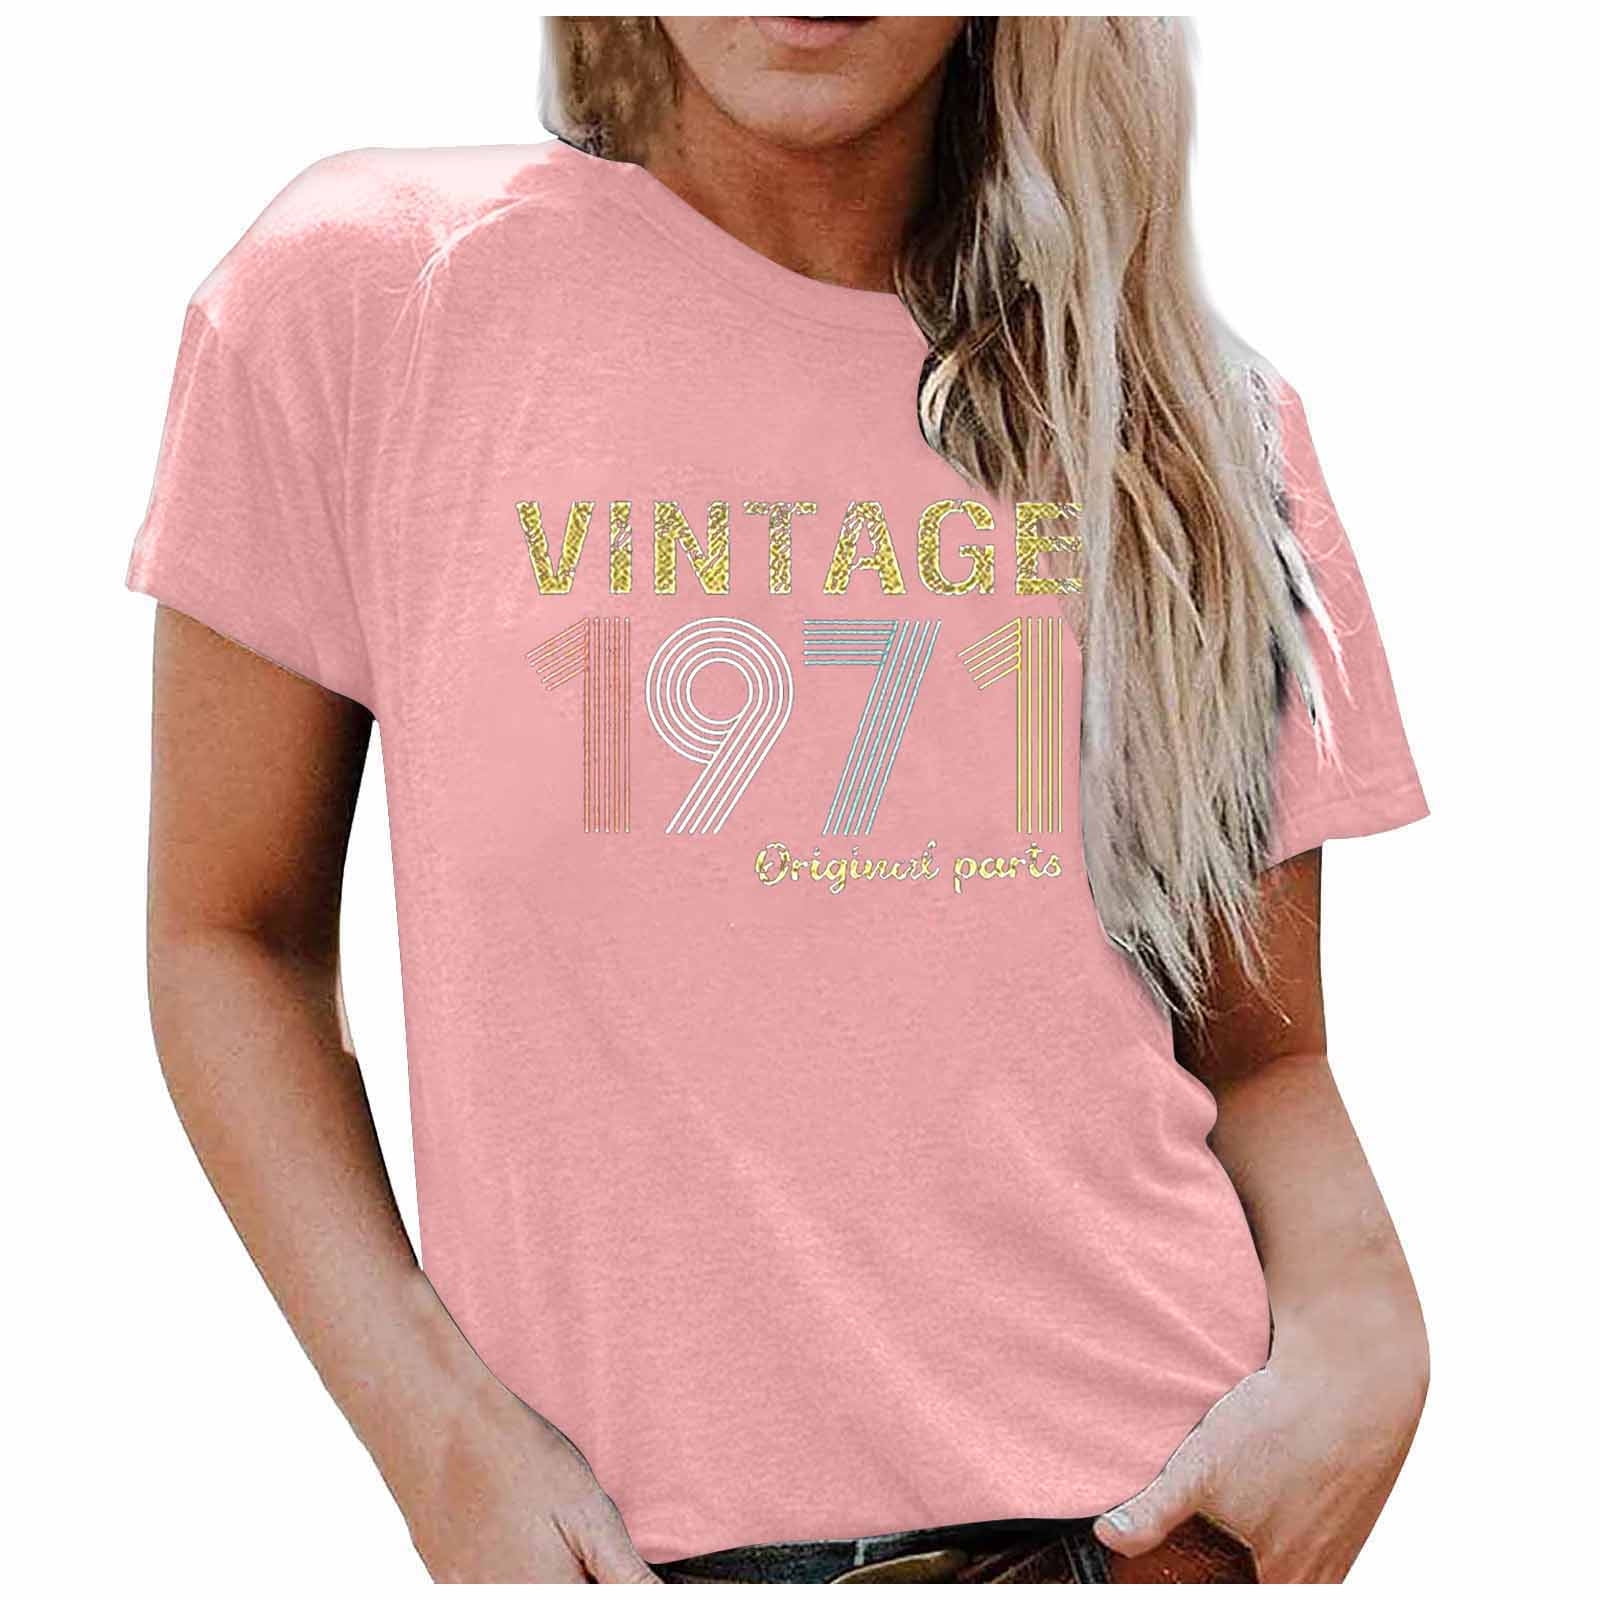 Womens Blouses and Tops for Summer 50th Birthday Gift T Shirt for Women Vintage 1971 Original Parts Tee Cute Tee 